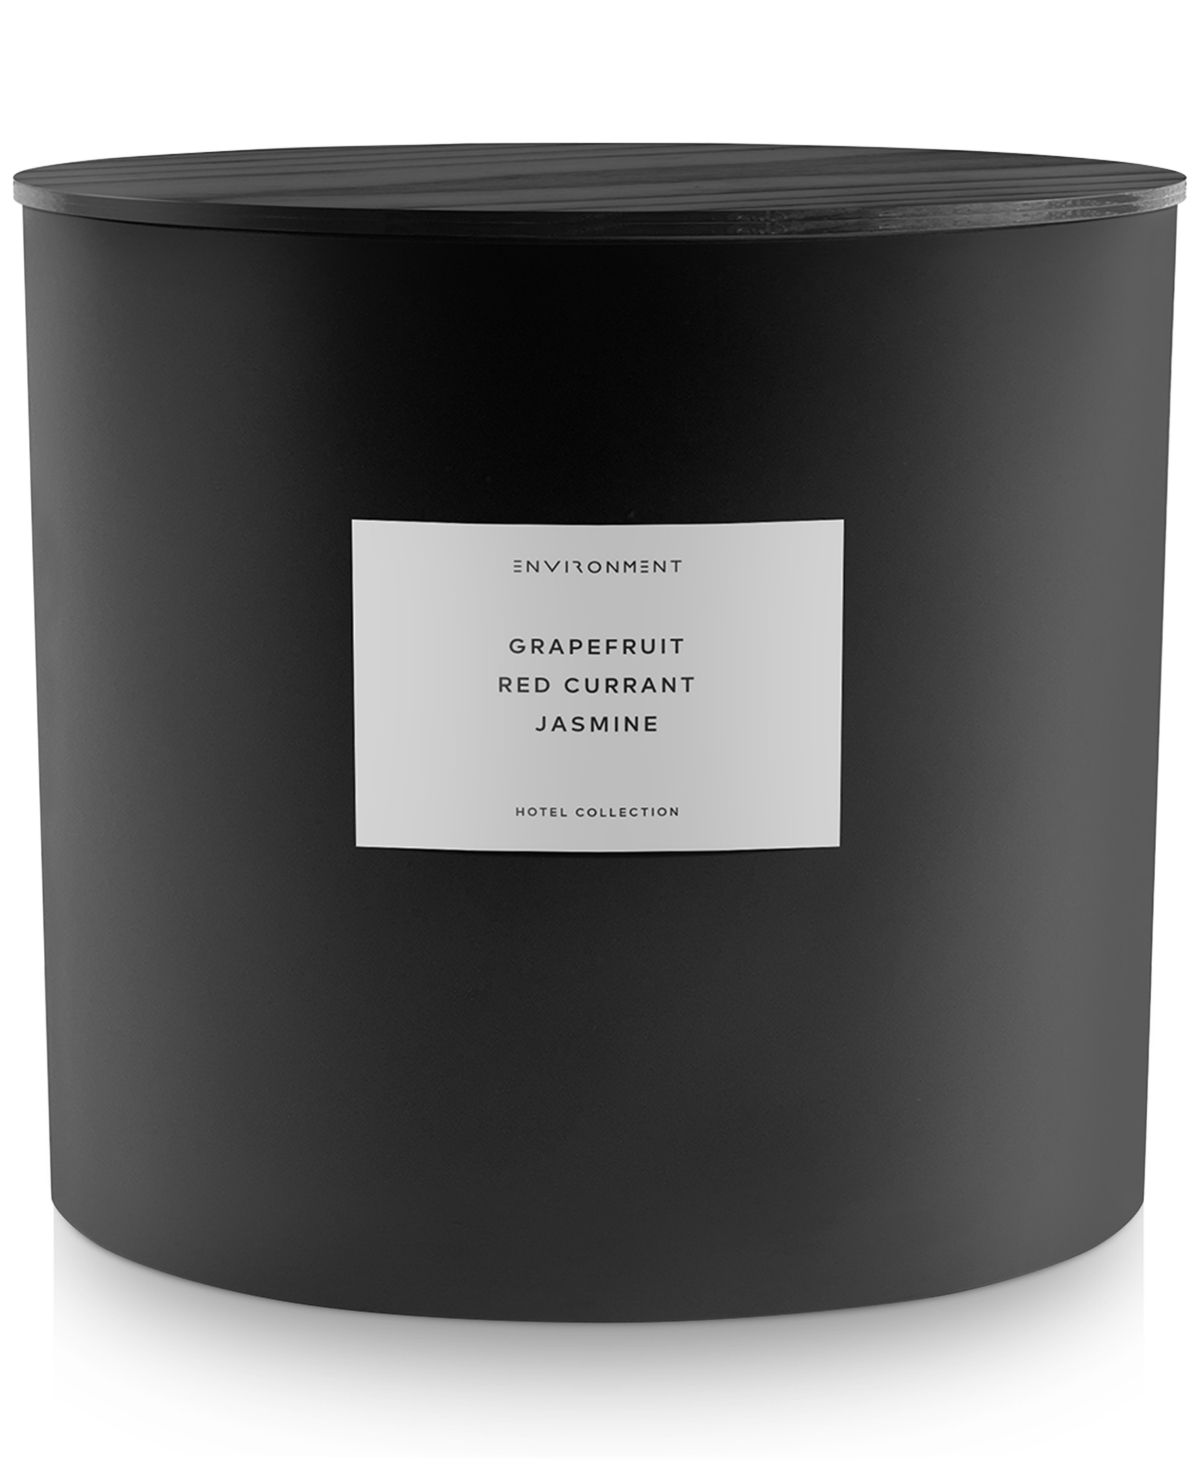 Grapefruit, Red Currant & Jasmine Candle (Inspired by 5-Star Hotels), 55 oz.